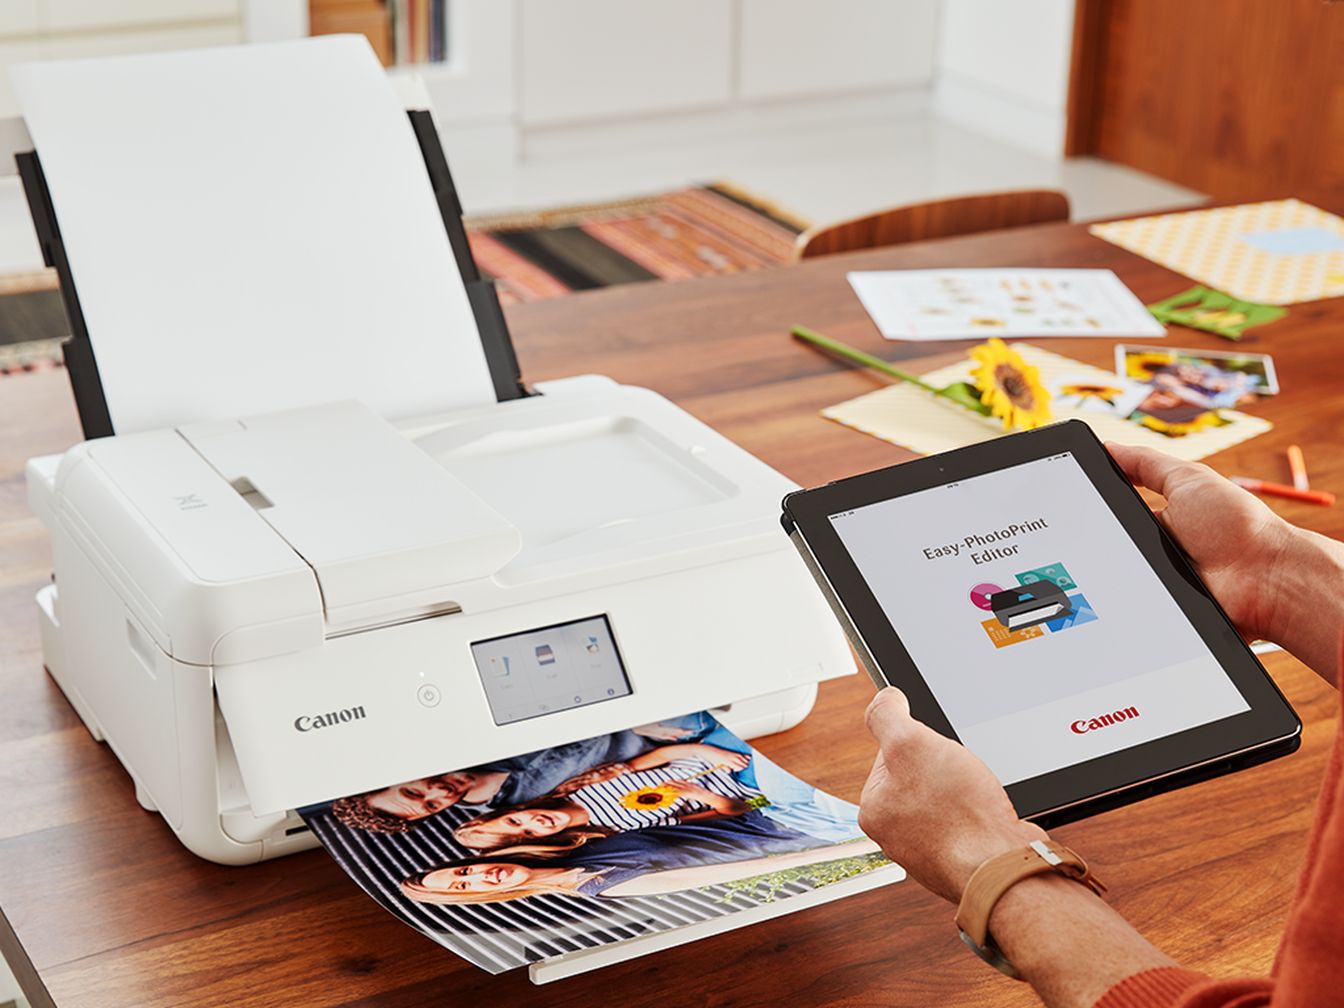 How To Connect A Printer To A Tablet